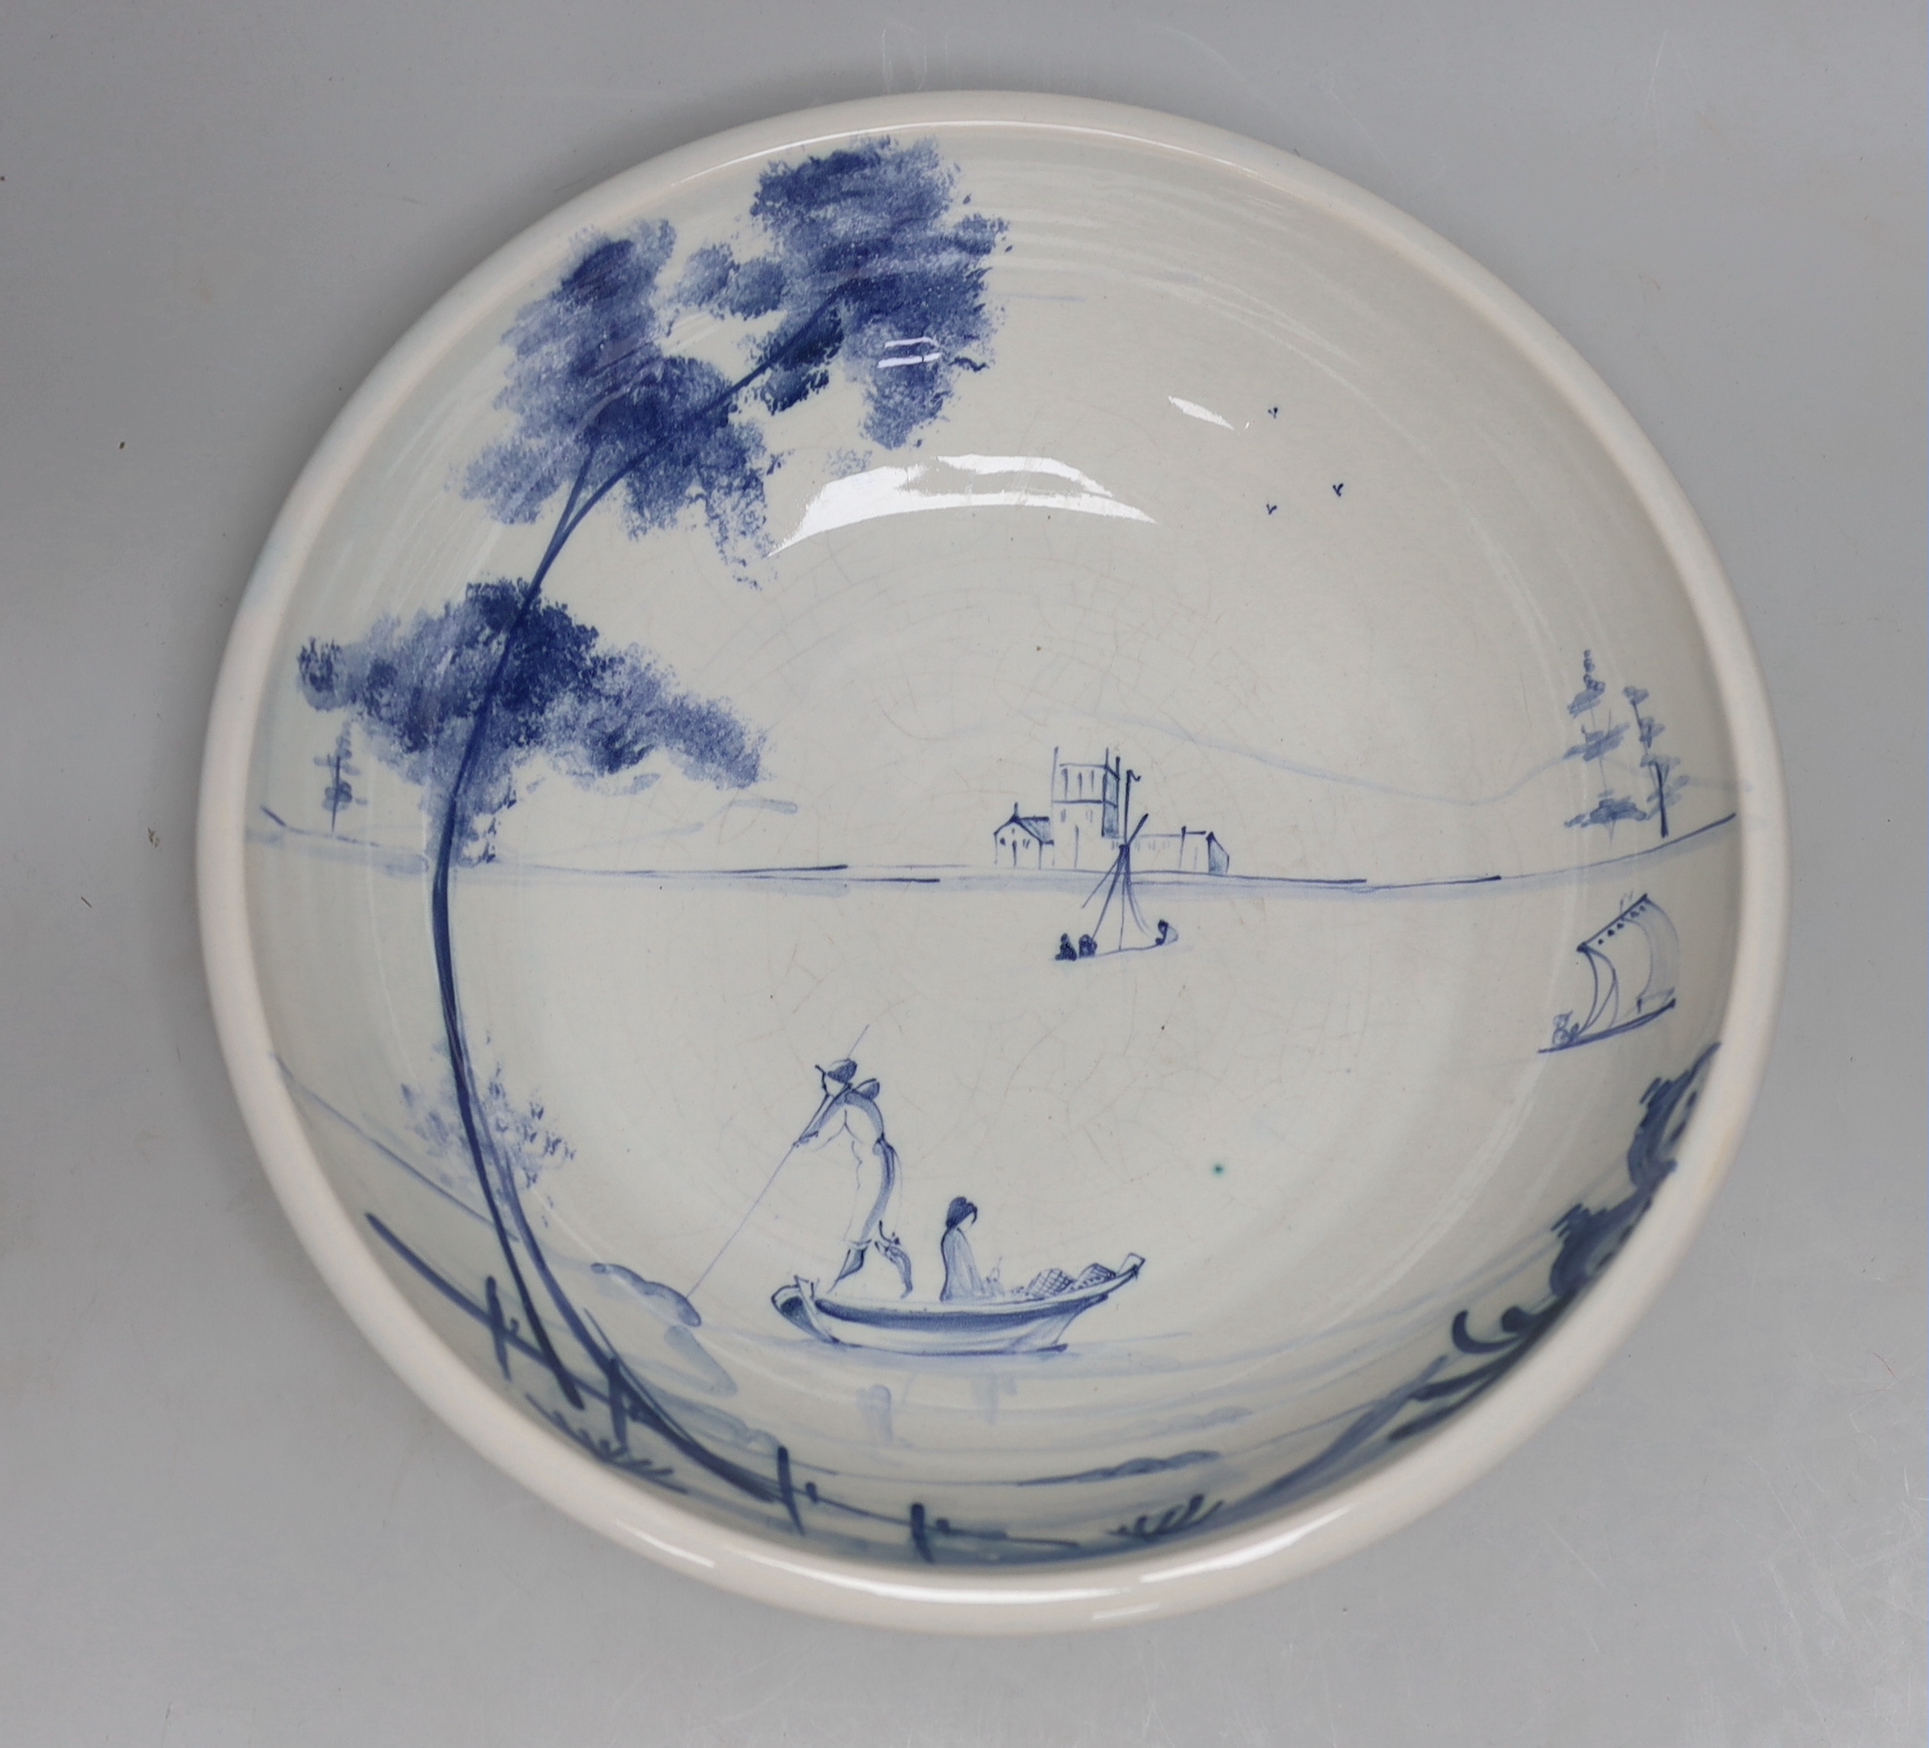 Deborah Sears for ISIS ceramics, blue and white bowl, hand painted with figures in boats, mark to the base, 33cm in diameter